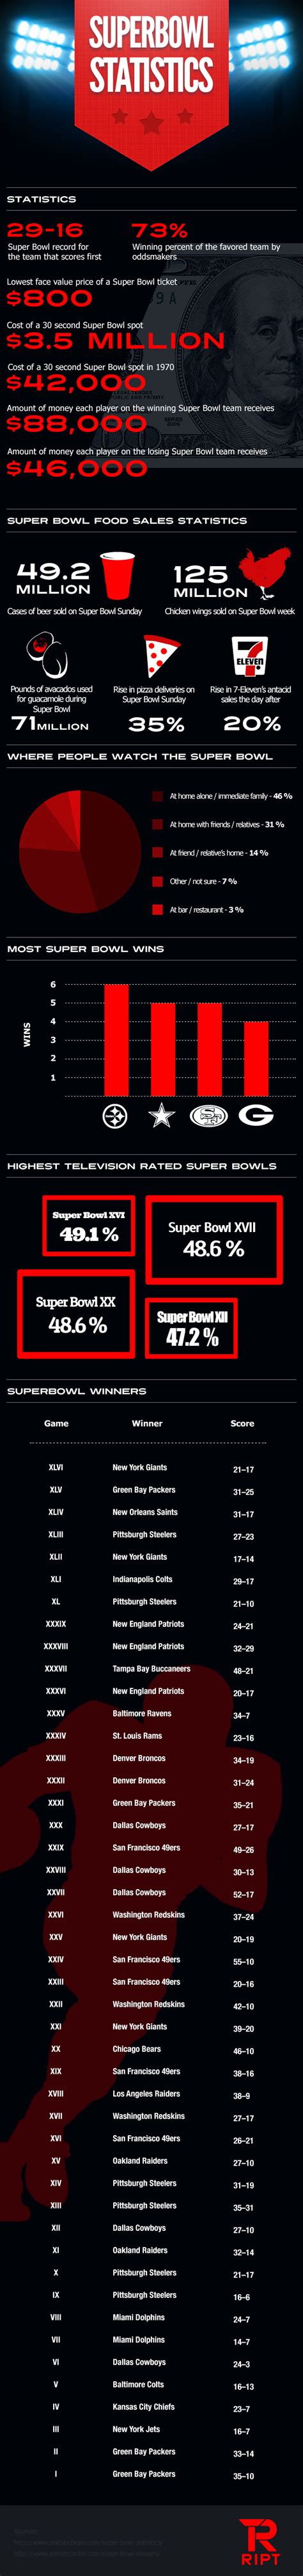 Get instant access to a free live streaming chart of the gamestop corp stock. Super Bowl XLVII facts and statistics {Infographic} | The ...